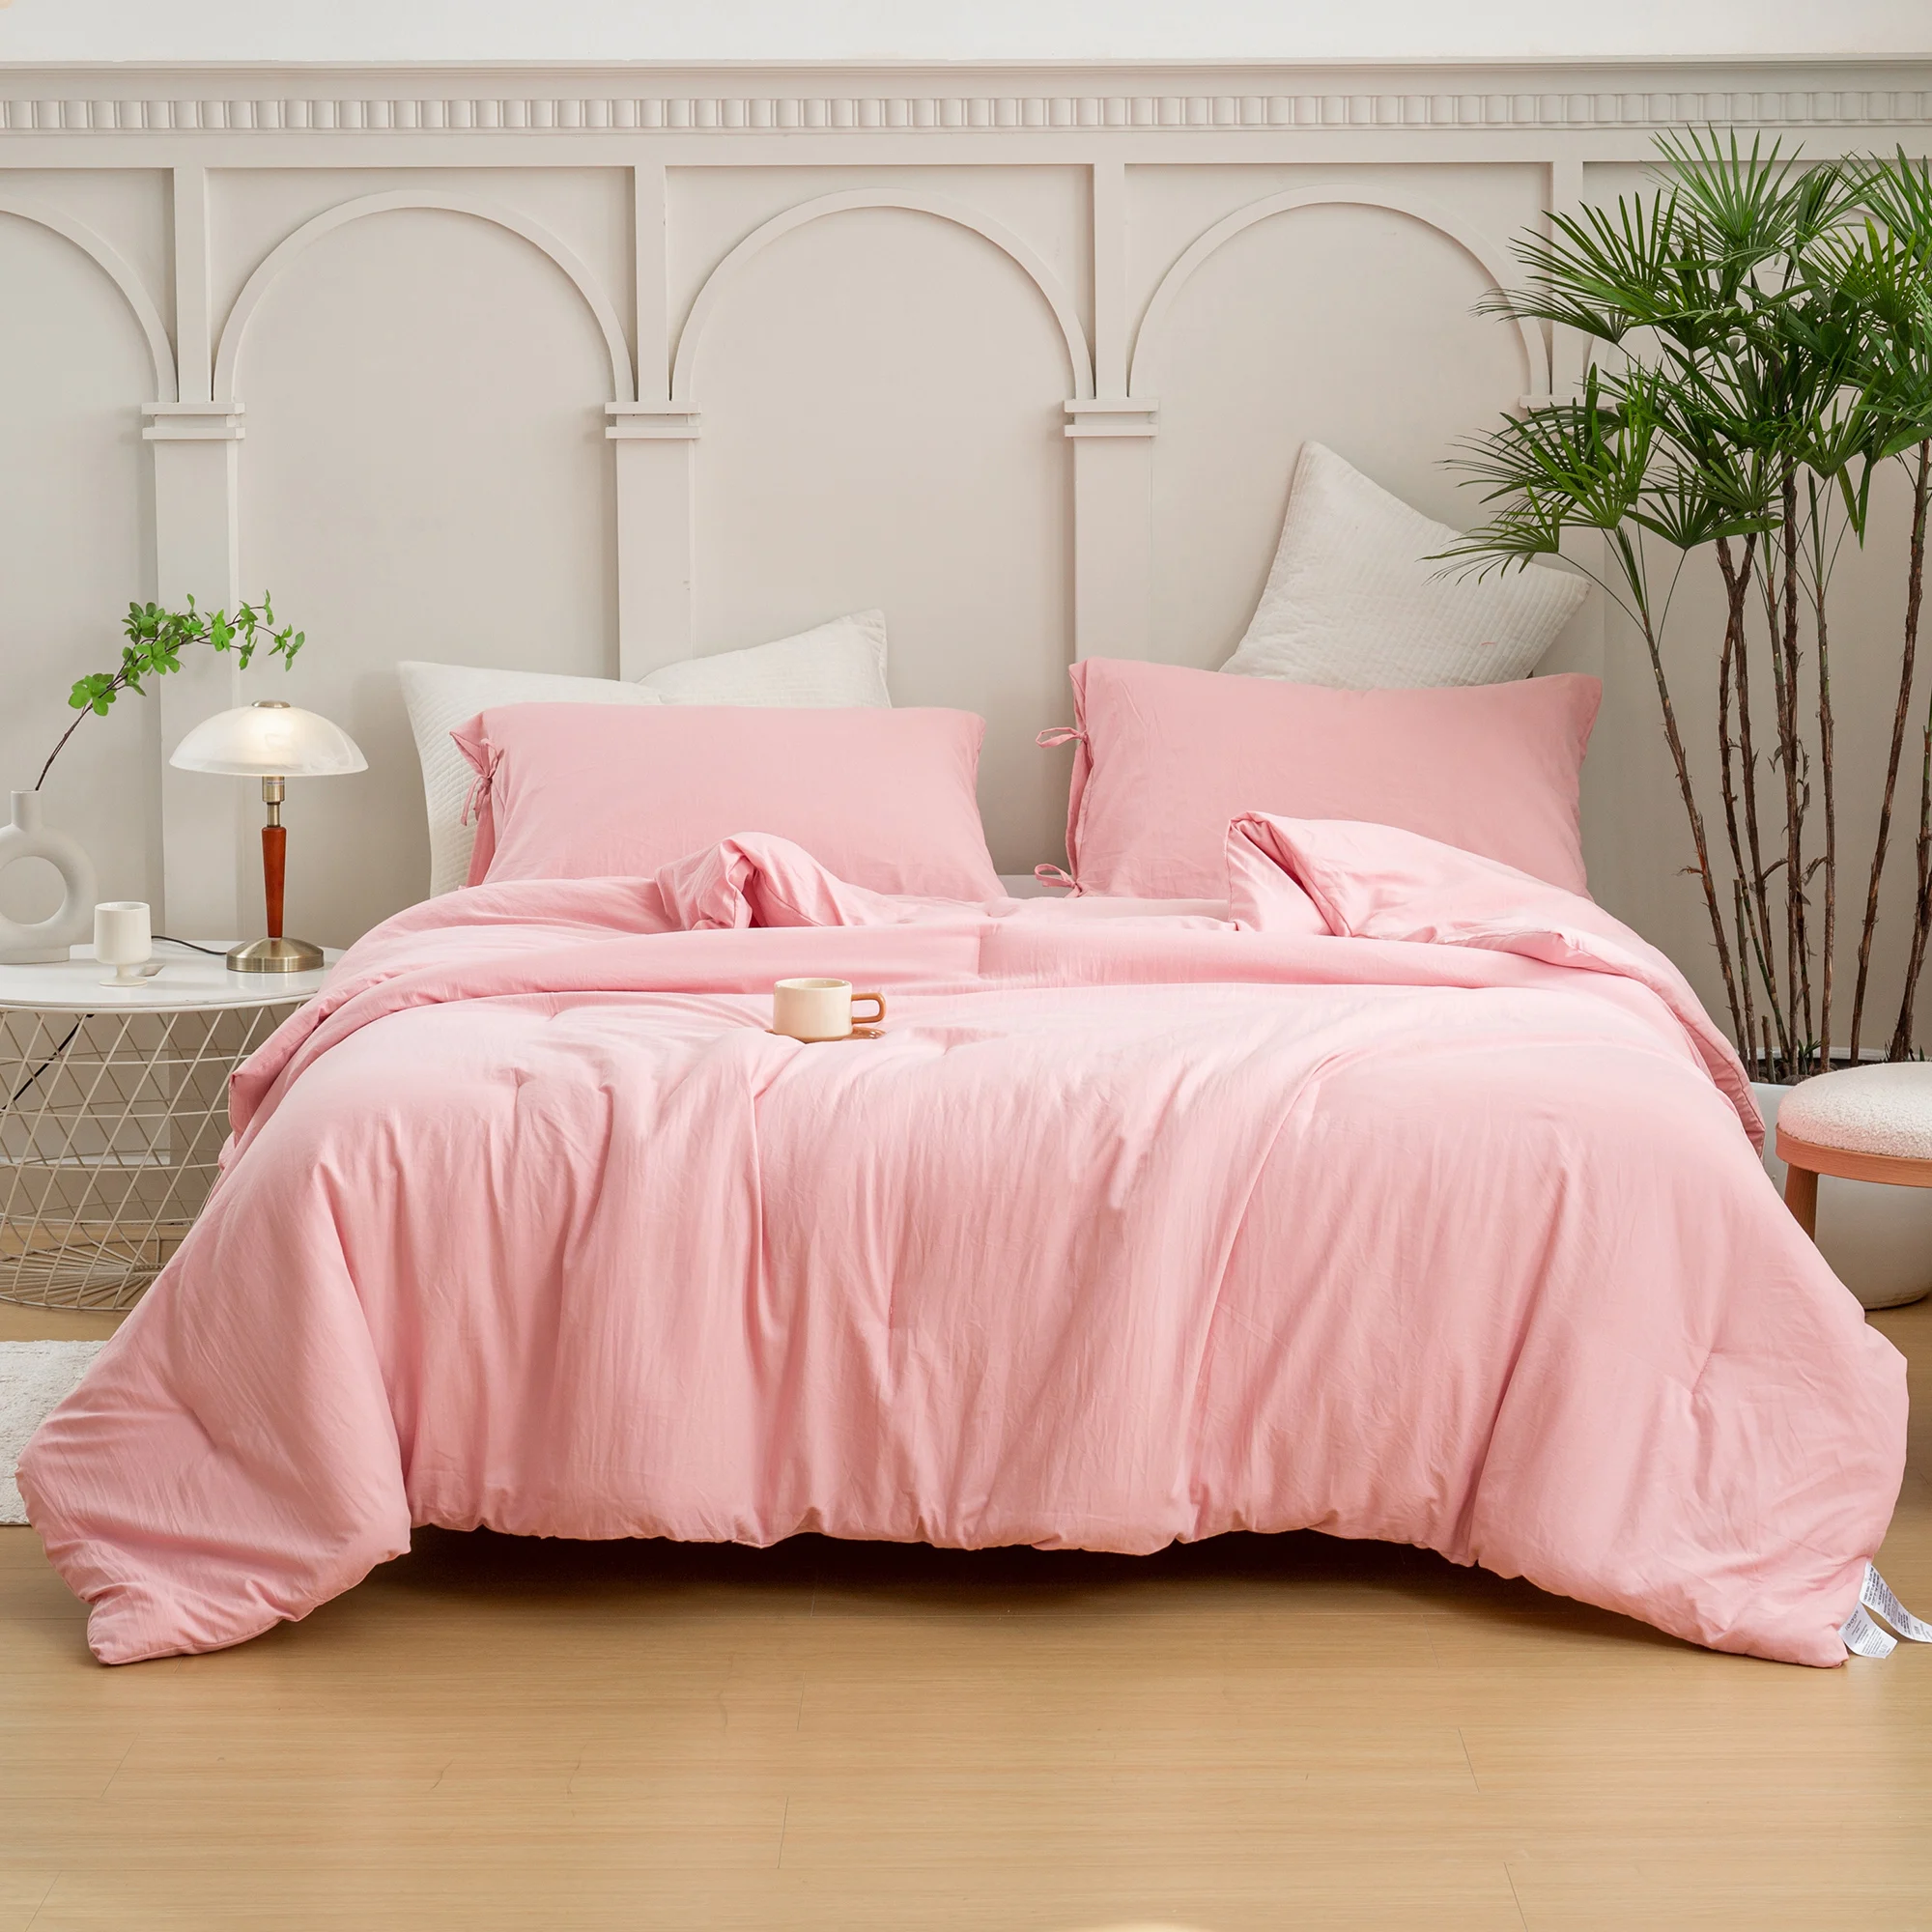 

Light Pink Twin Comforter Set for College Girls Ultra-Soft Lightweight Washed Cotton Bedding Comforter Sets All Season Use